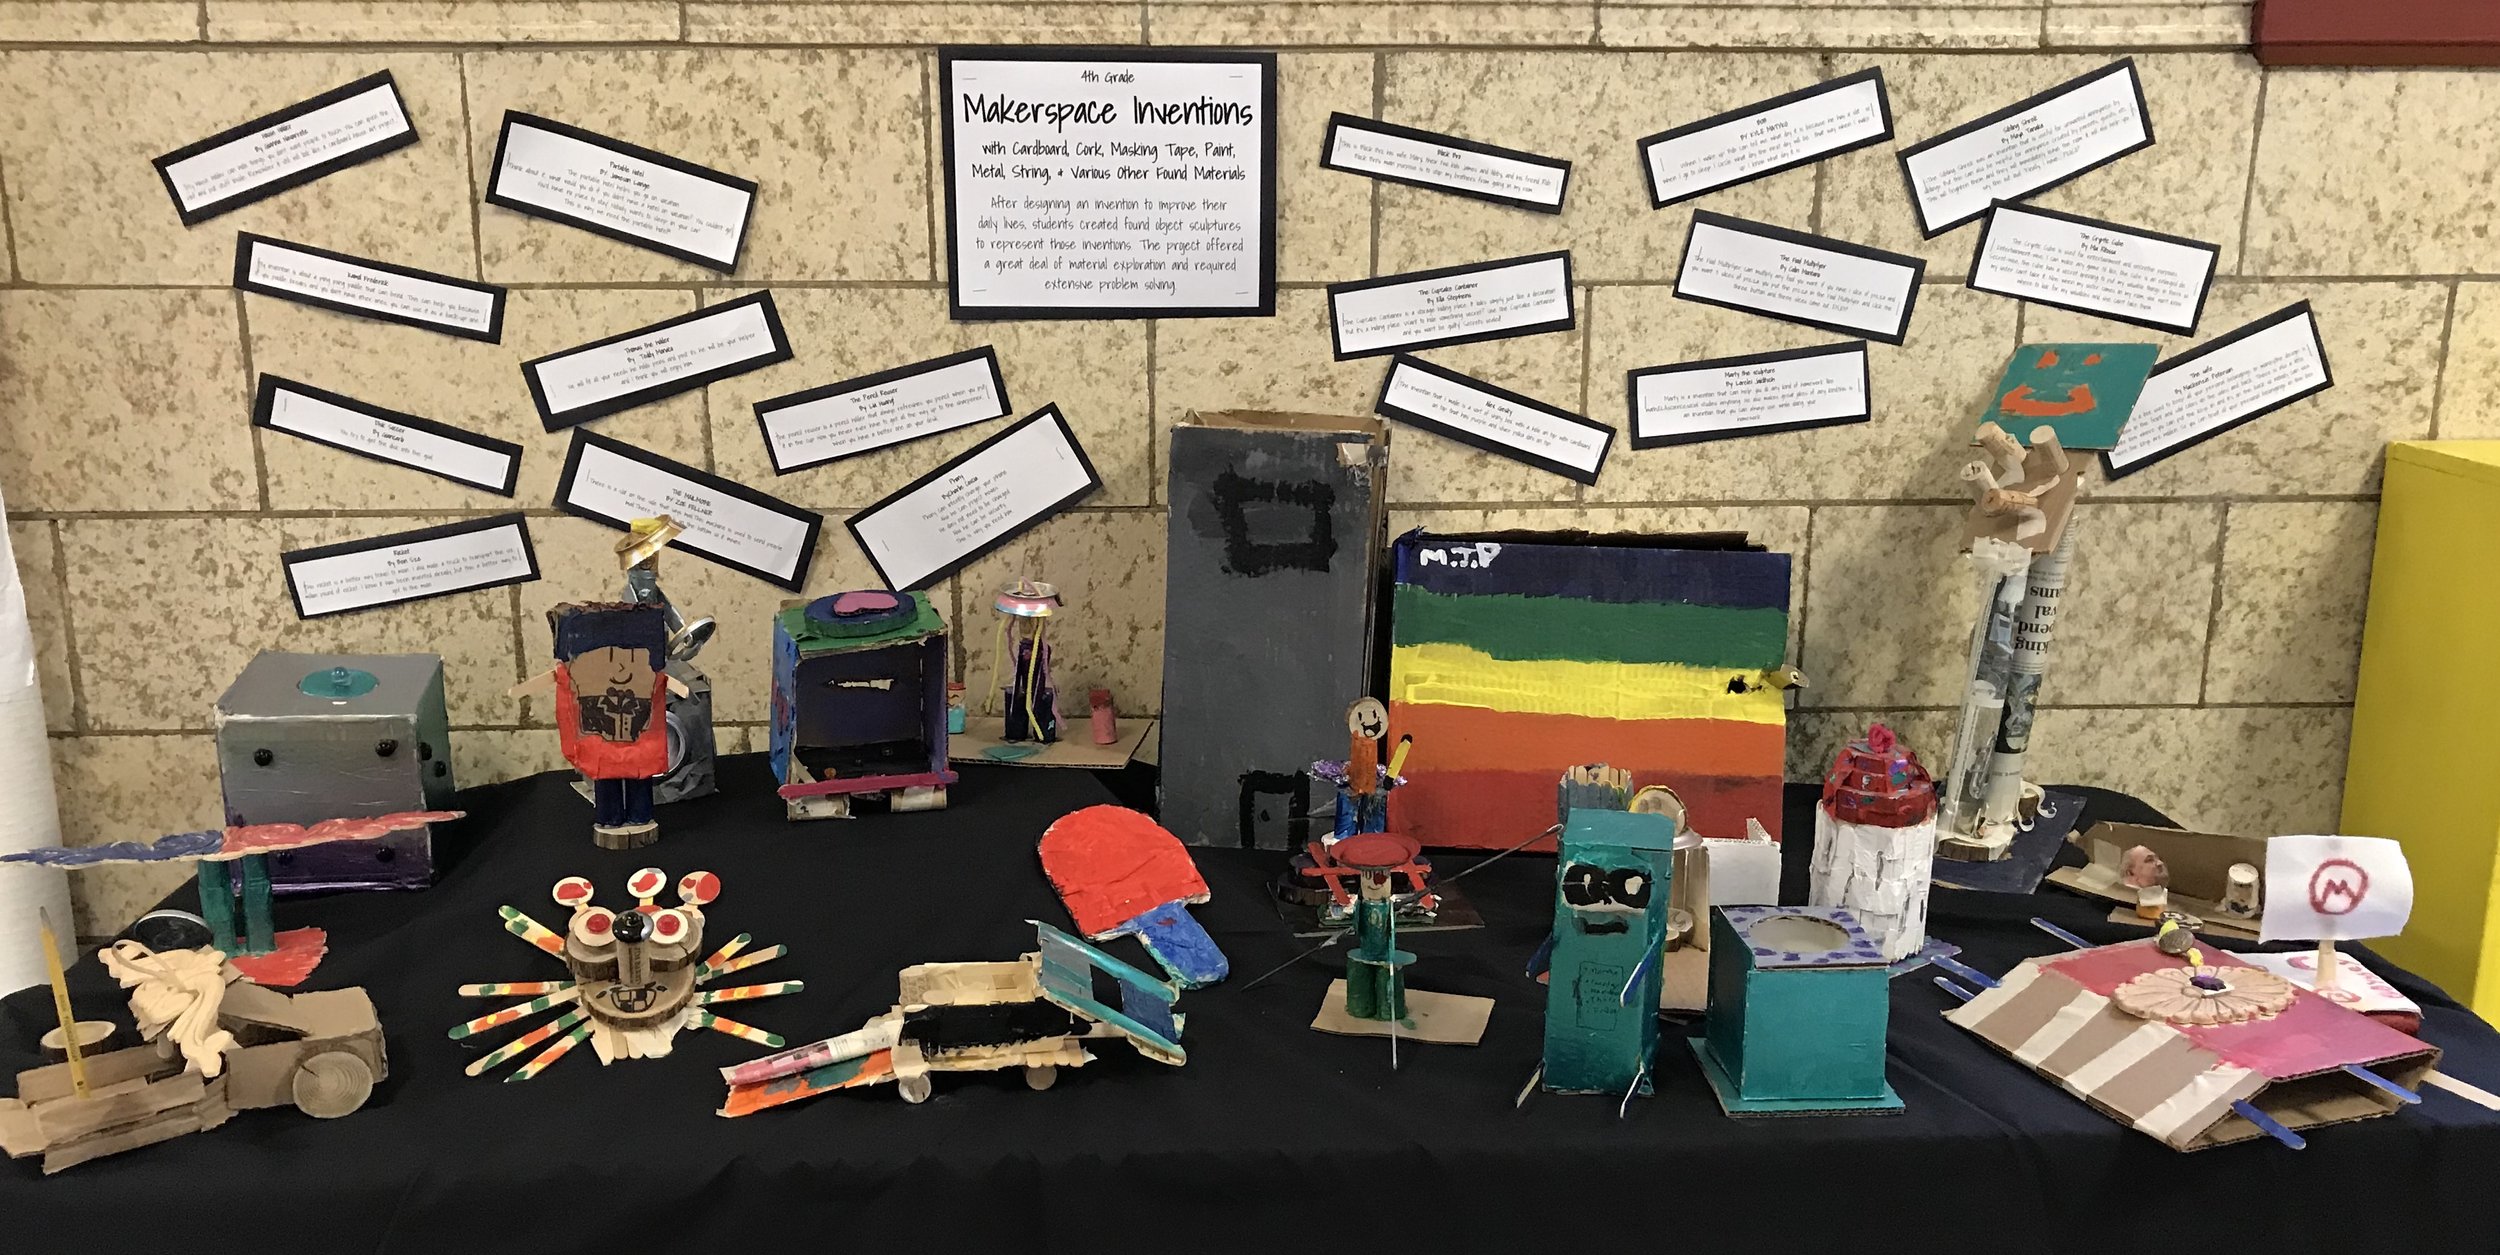 Makerspace Inventions